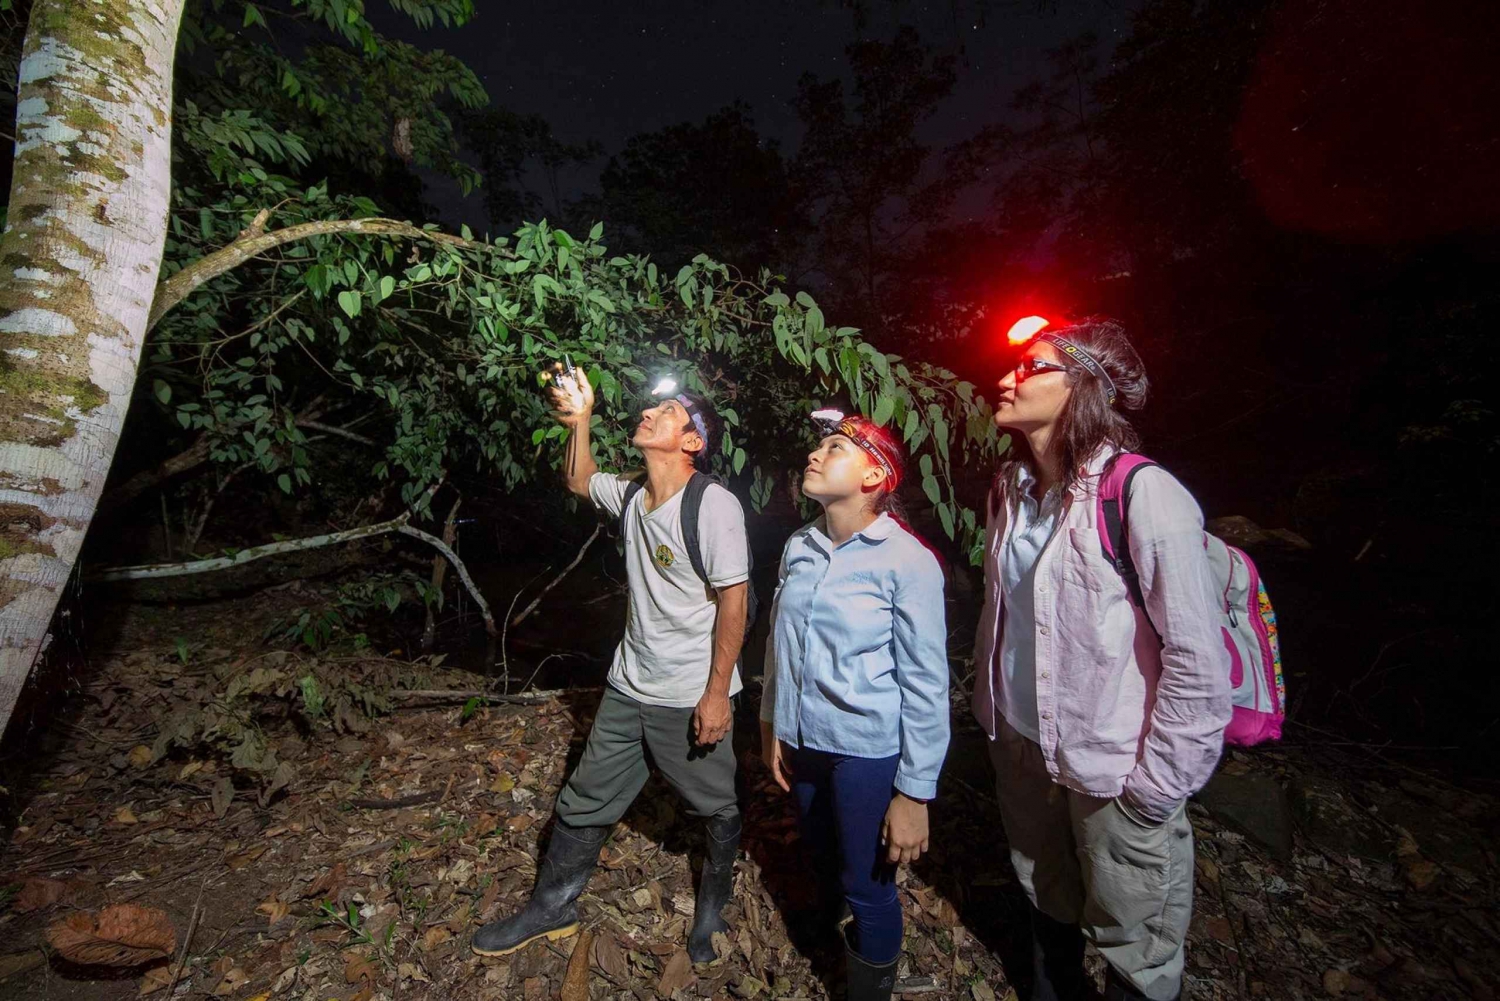 From Madre de Dios ||Night trekking in the Amazon jungle